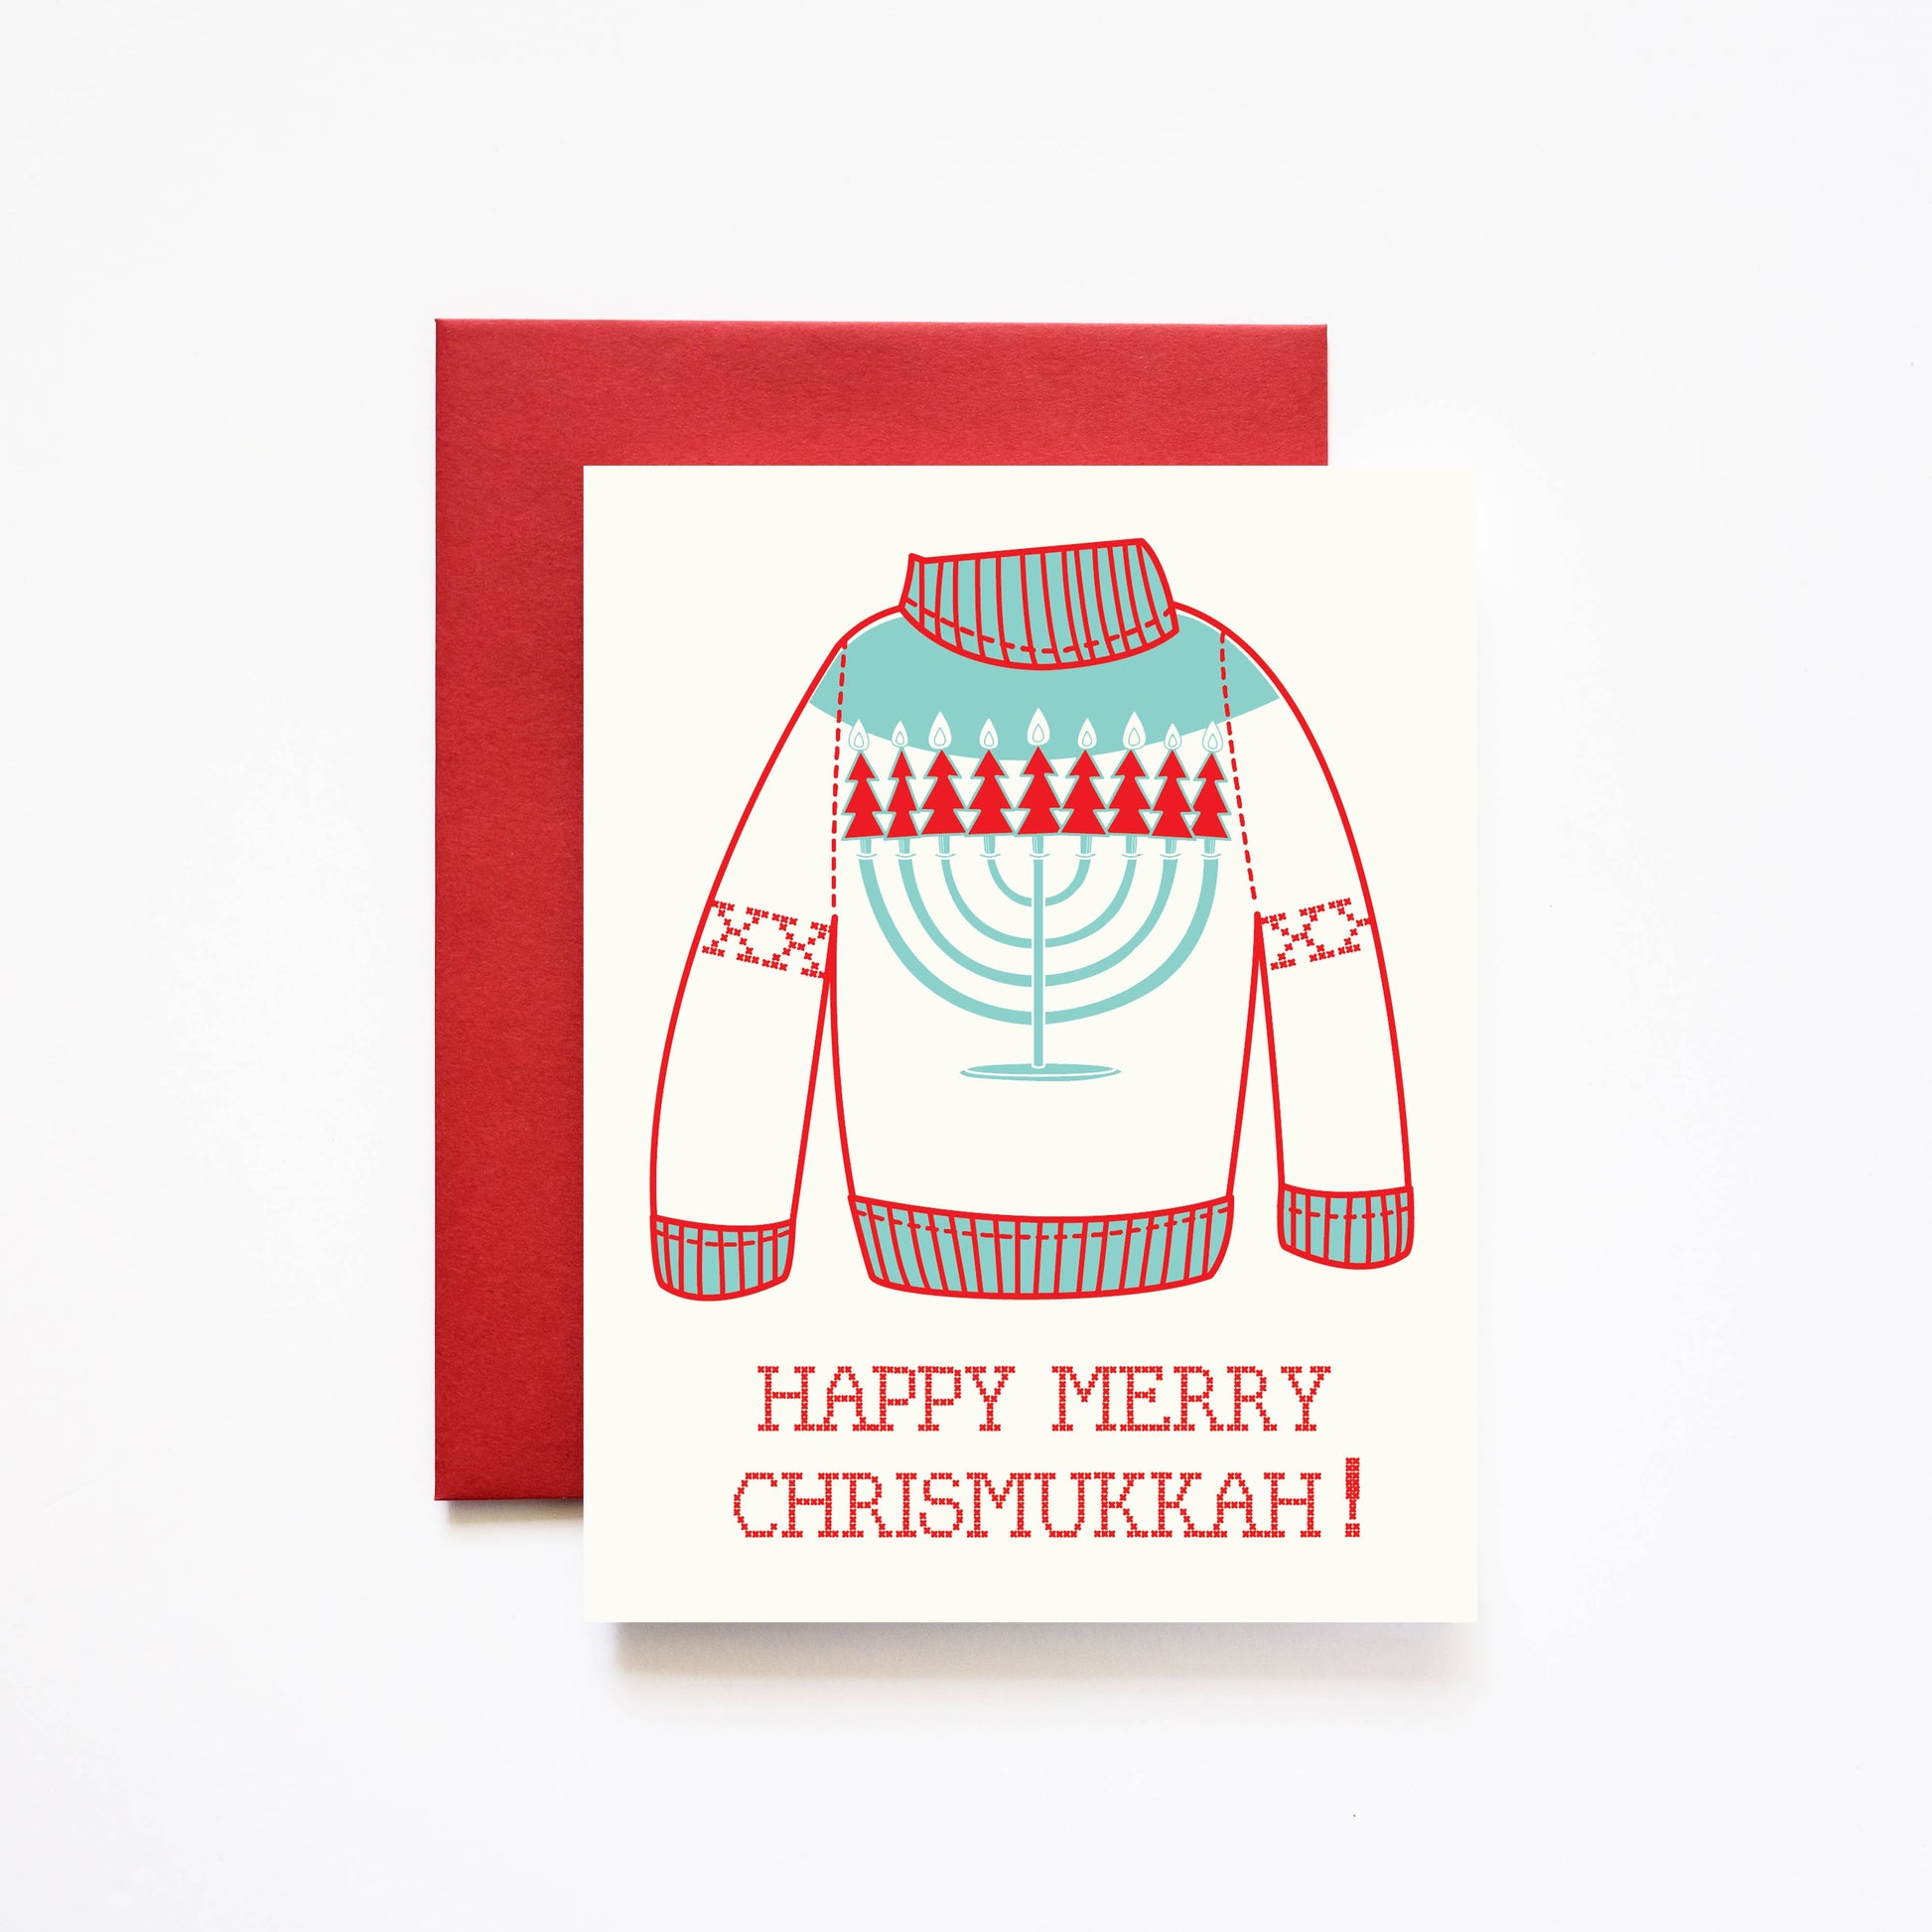 Holiday greeting card that reads "Happy Merry Chrismukkah!" underneath a knit sweater with a menorah on it 